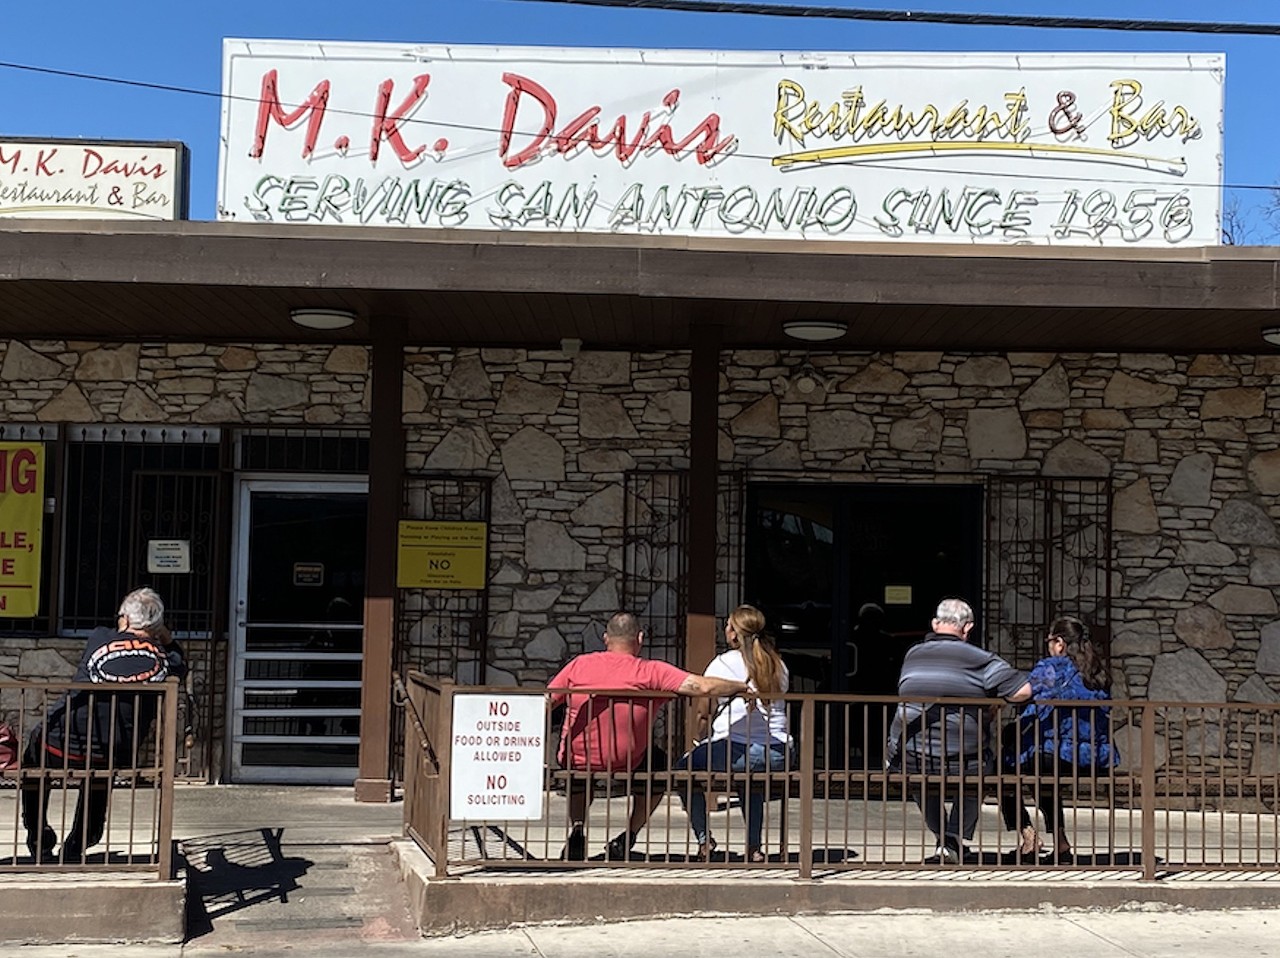 M.K. Davis Restaurant & Bar
1302 N. Flores St., (210) 223-1208, facebook.com/mkdavisrestaurant
This family-owned restaurant specializes in serving up steaks, seafood and Mexican food to hungry San Antonians. What started in 1956 with picnic tables and ice-cold beers is now an Alamo City classic with both food and an atmosphere that remains true to the restaurant’s family roots.